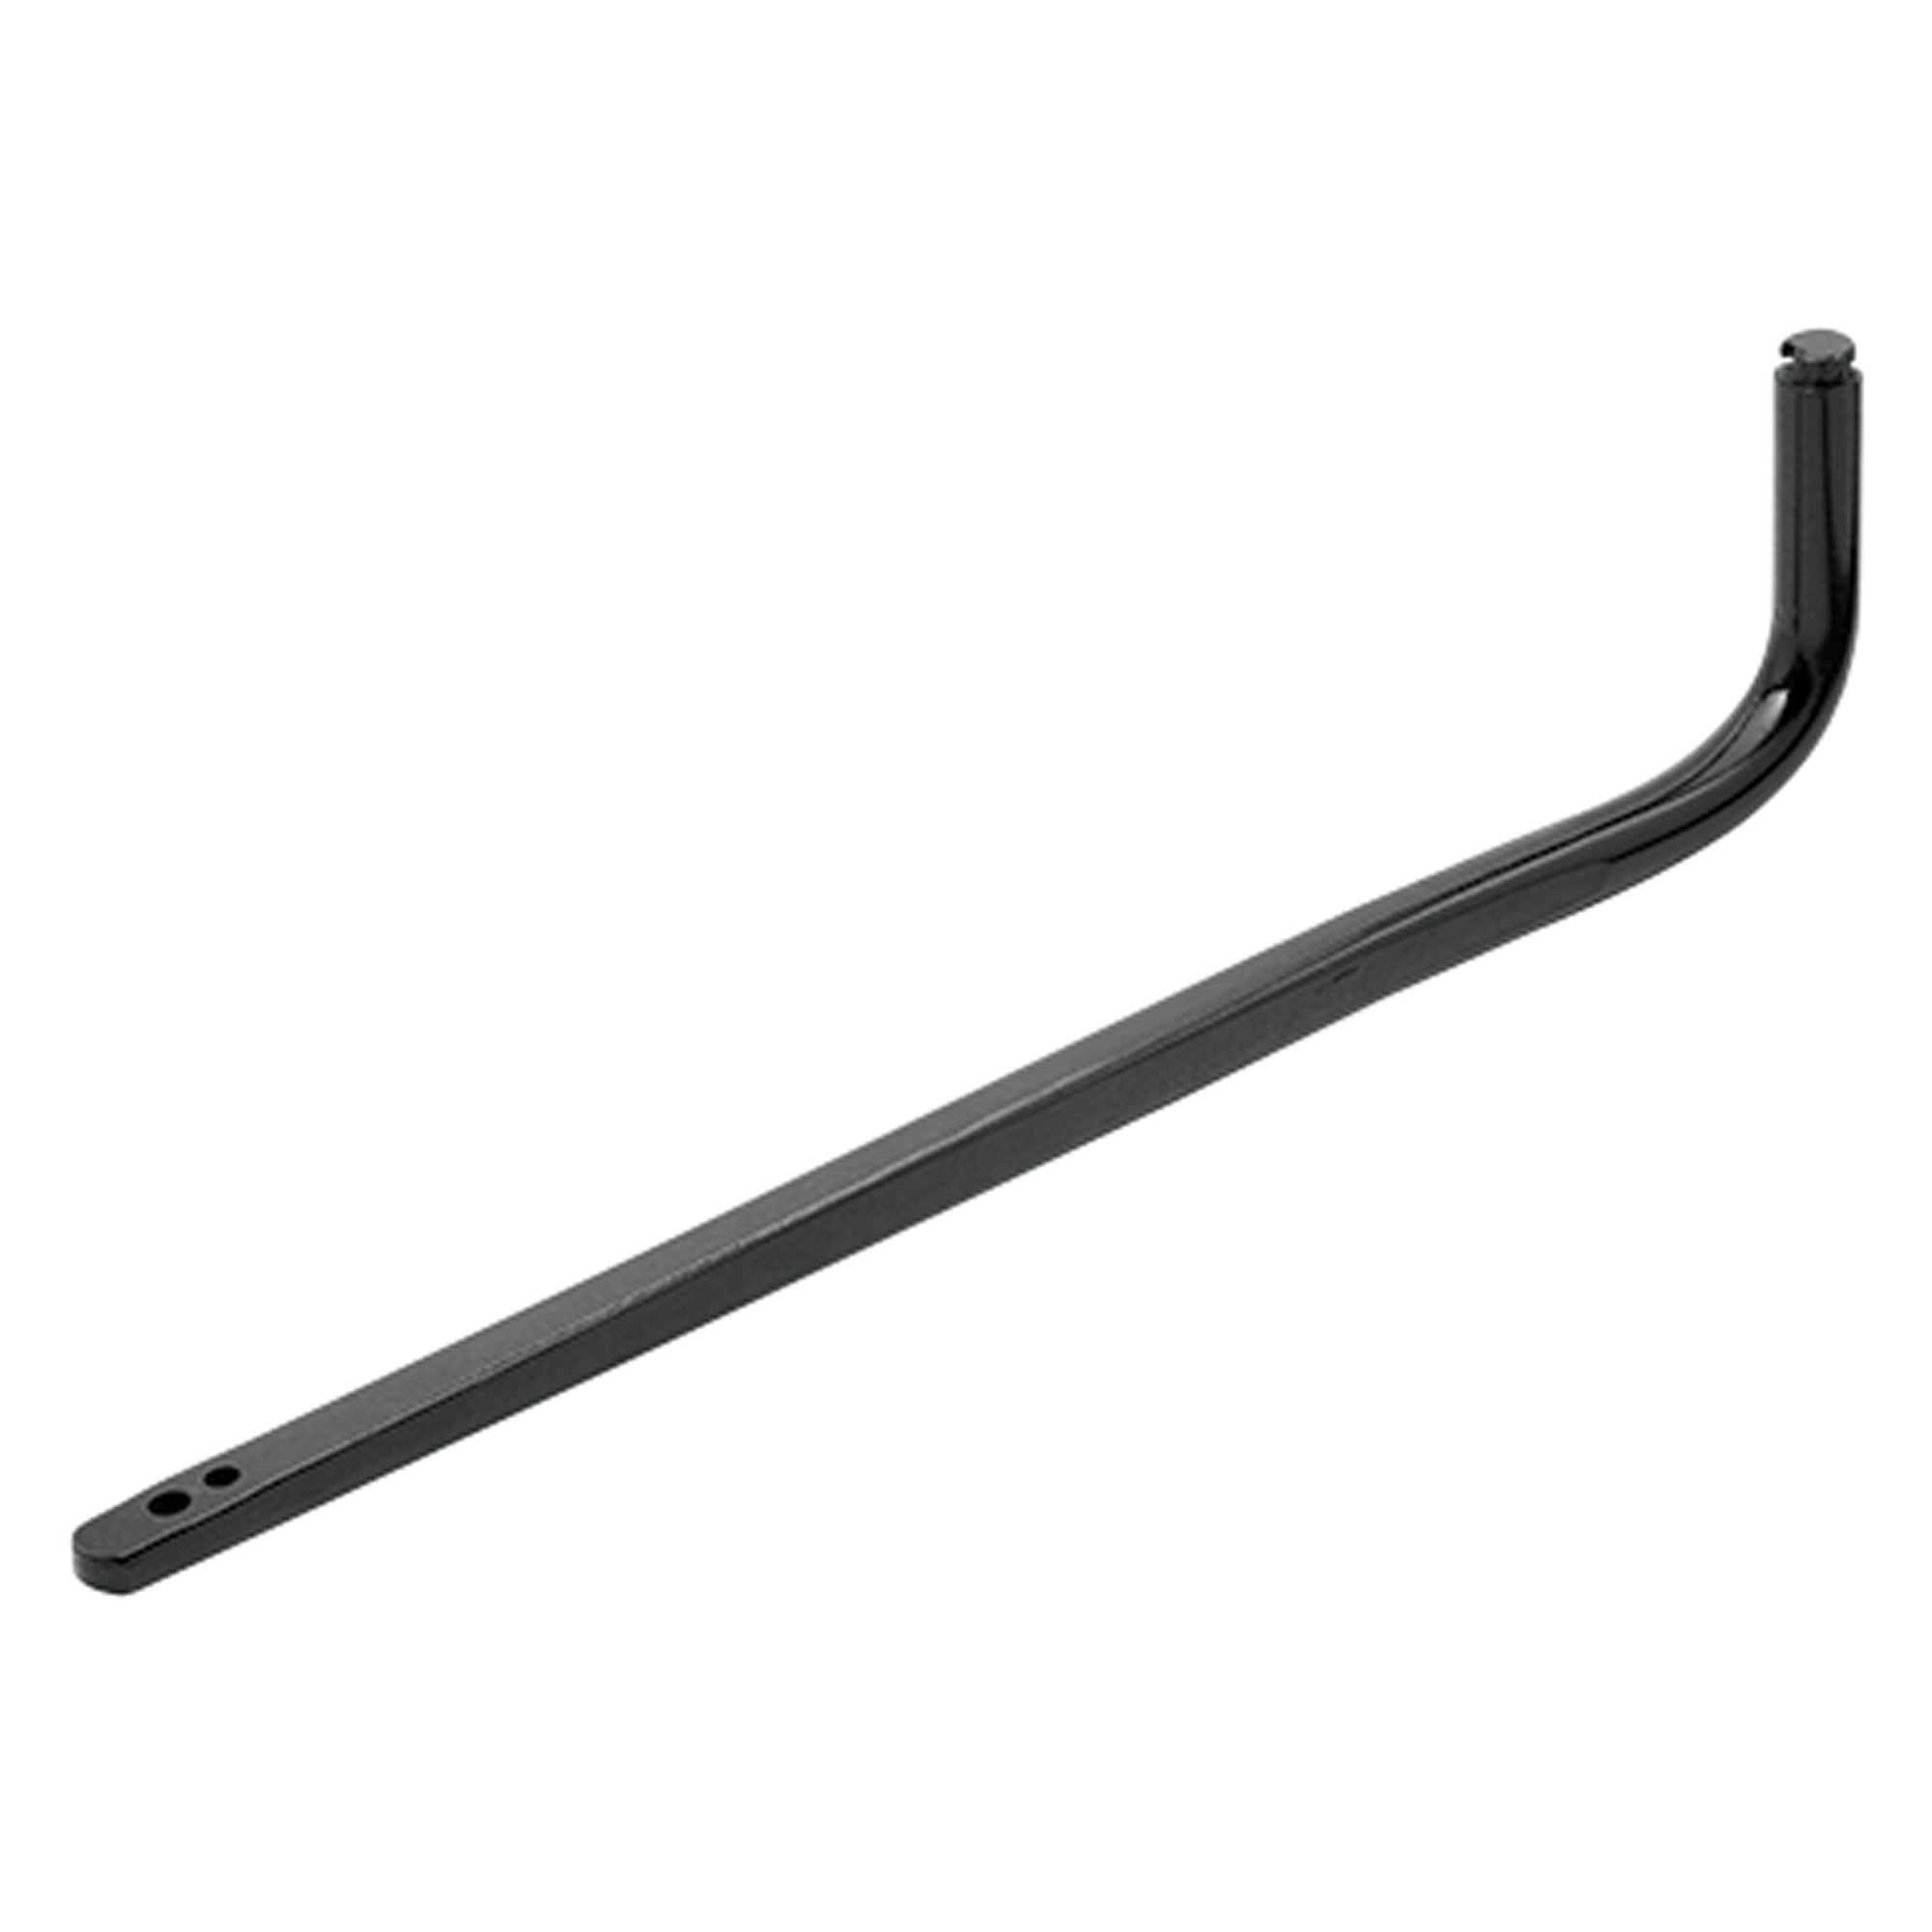 Reese 58338 RB2 Weight Distributing Hitch Spring Bar - 1200 lbs.